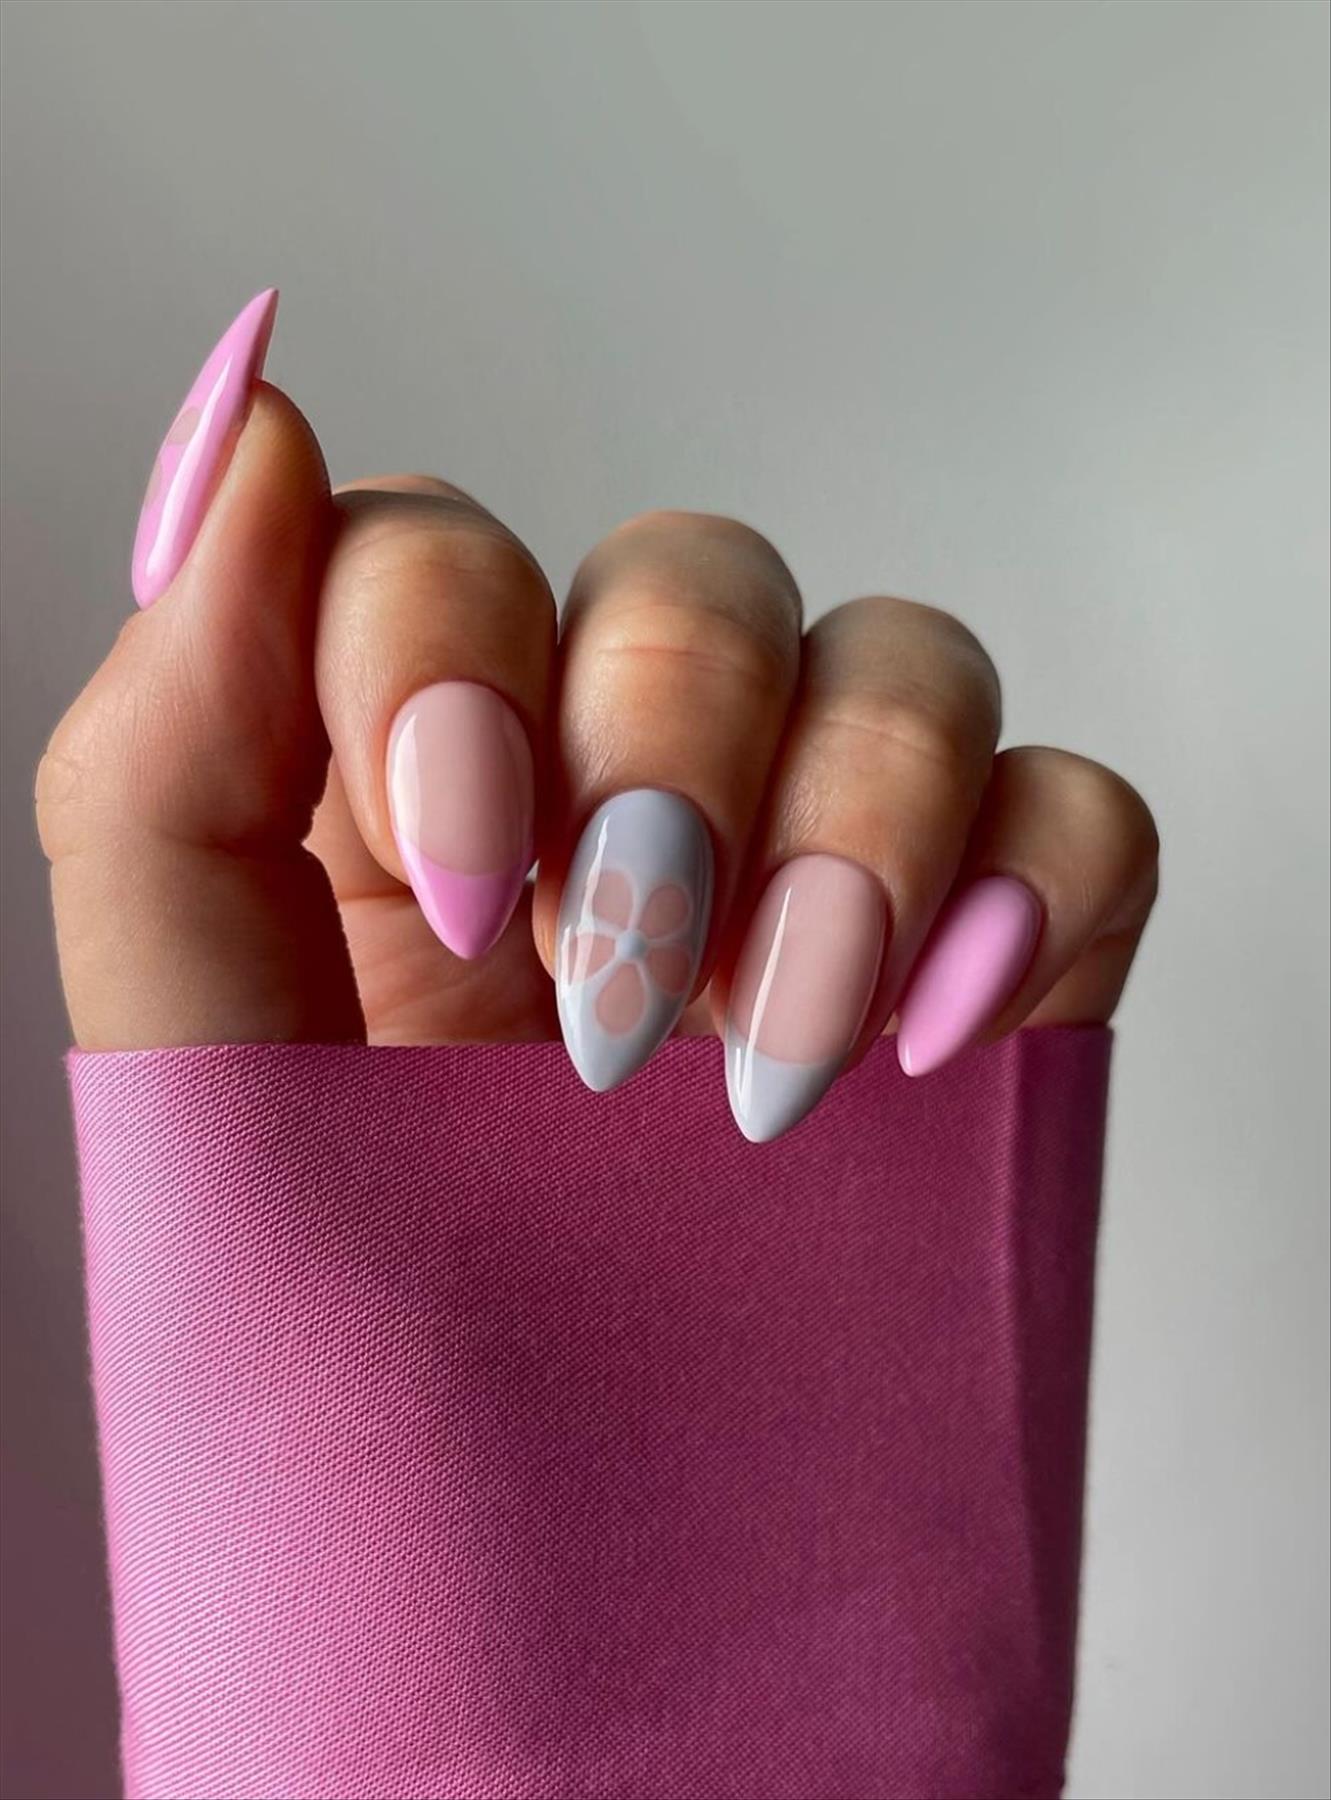 Fresh Short Almond Nails for a Stylish Summer Look